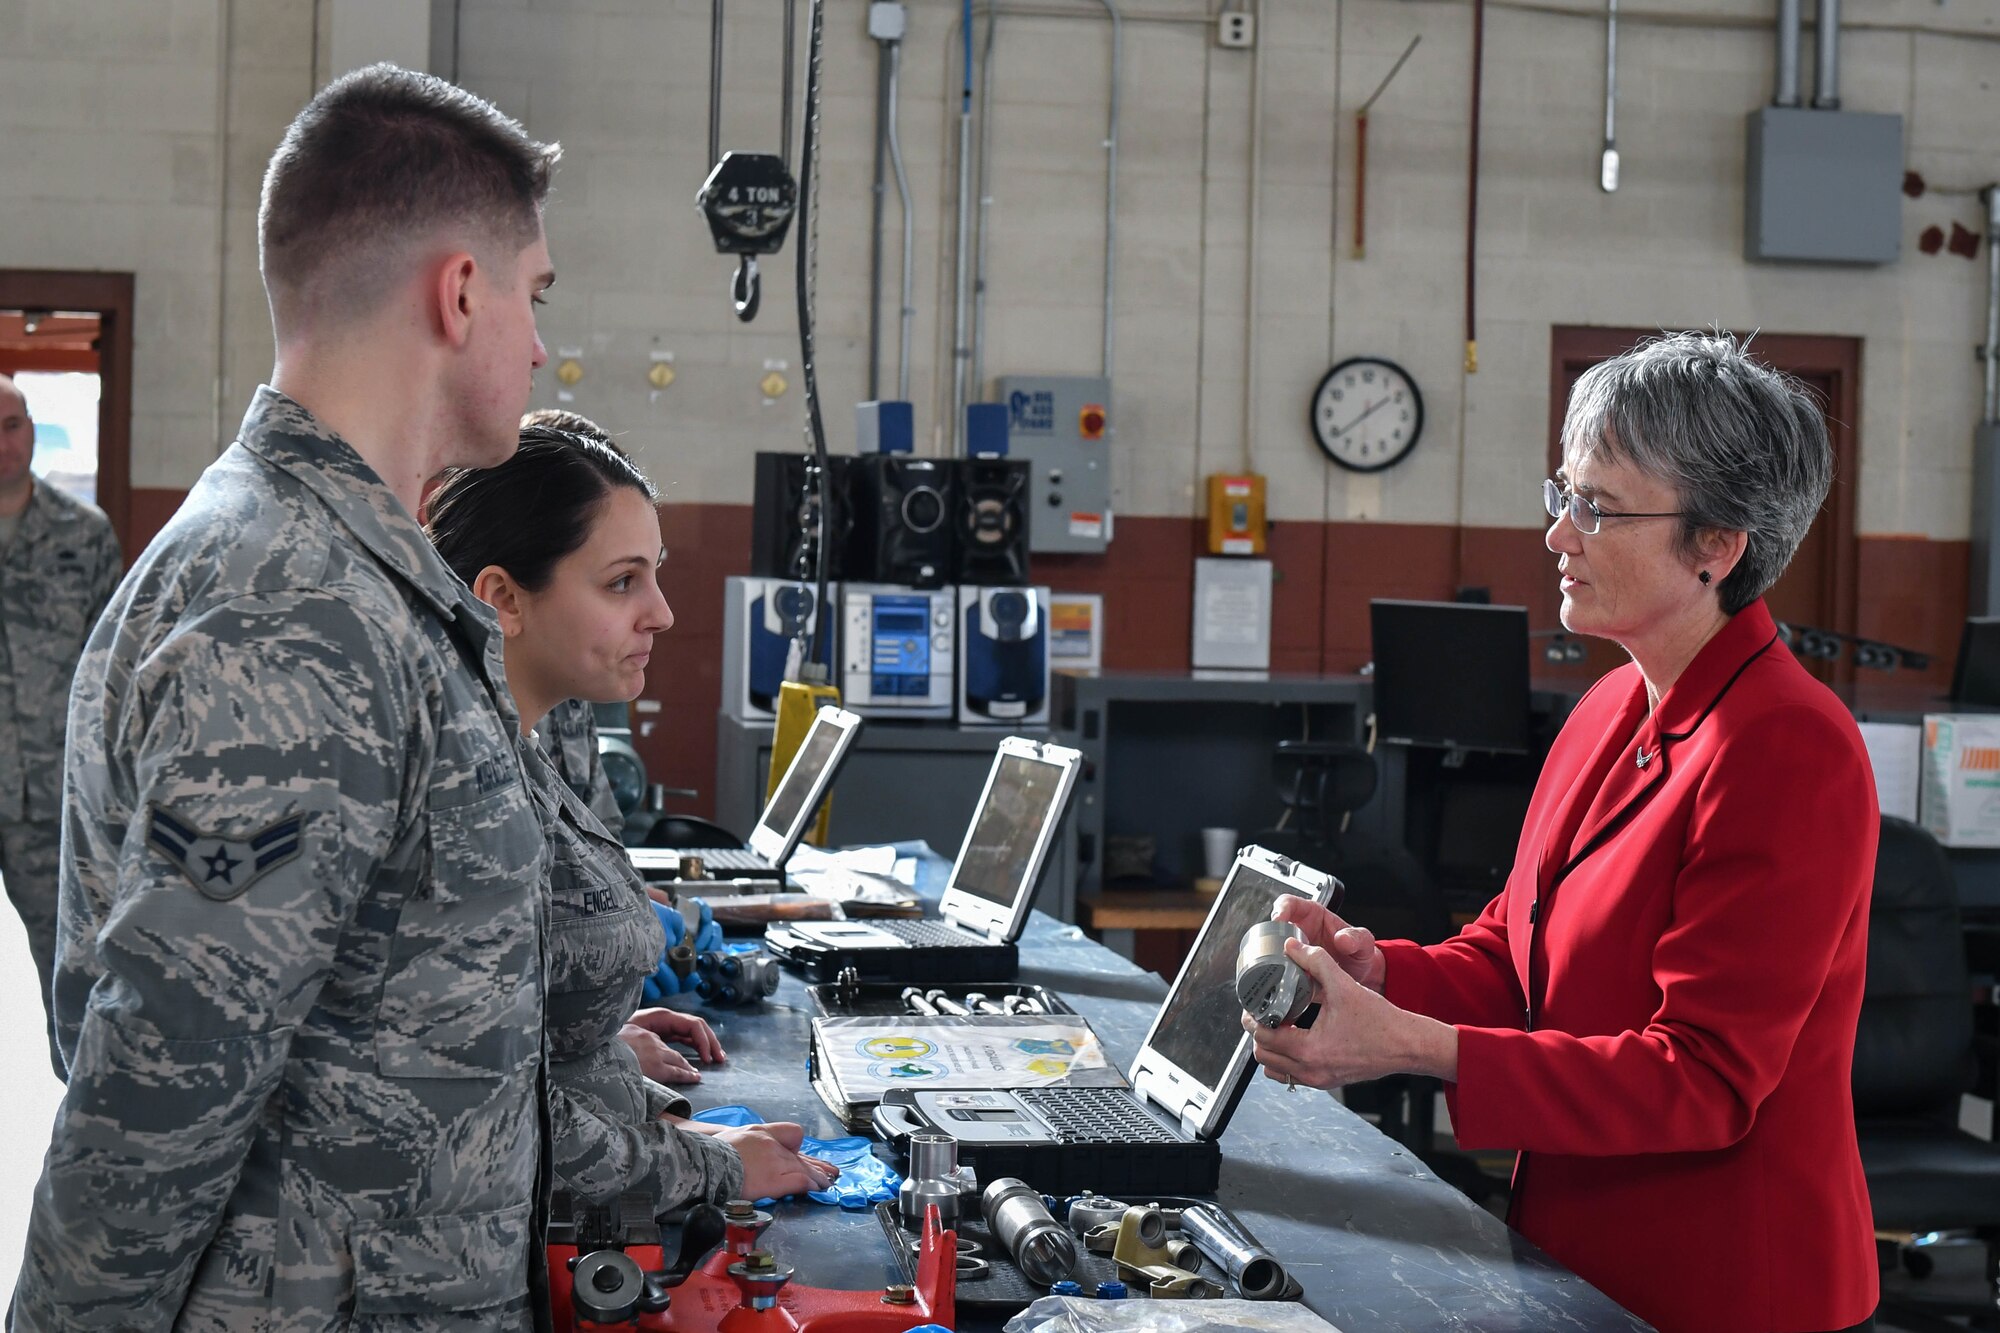 Secretary of the Air Force Heather Wilson speaks to 2nd Maintenance Squadron Airmen during a tour at Barksdale Air Force Base, La., Nov. 14, 2017. During her visit, Wilson visited Barksdale’s bomber hydraulic centralized repair facility. The newly derived unit, which has only been at Barksdale since 2015, is able to accommodate assets from the B-52 Stratofortress, the B-1 Lancer and the B-2 Spirit. The new facility saved Air Force Global Strike Command over 13$ million dollars so far in 2017. (U.S. Air Force photo by Senior Airman Mozer O. Da Cunha)